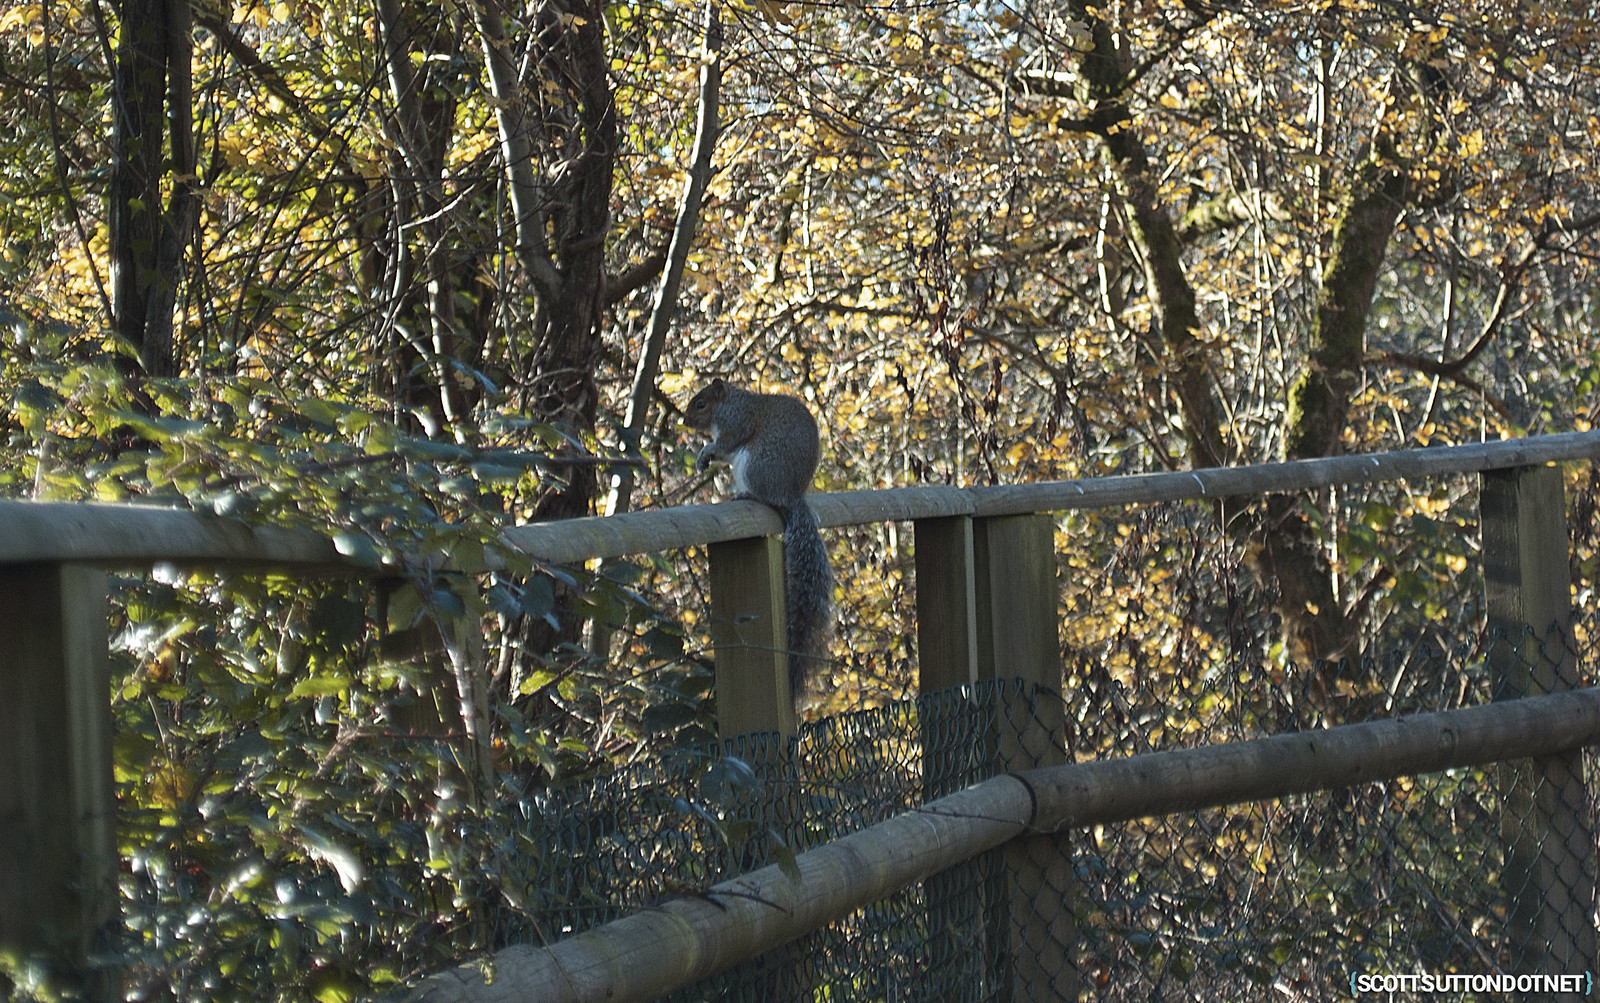 A squirel on the Caerleon cycle path